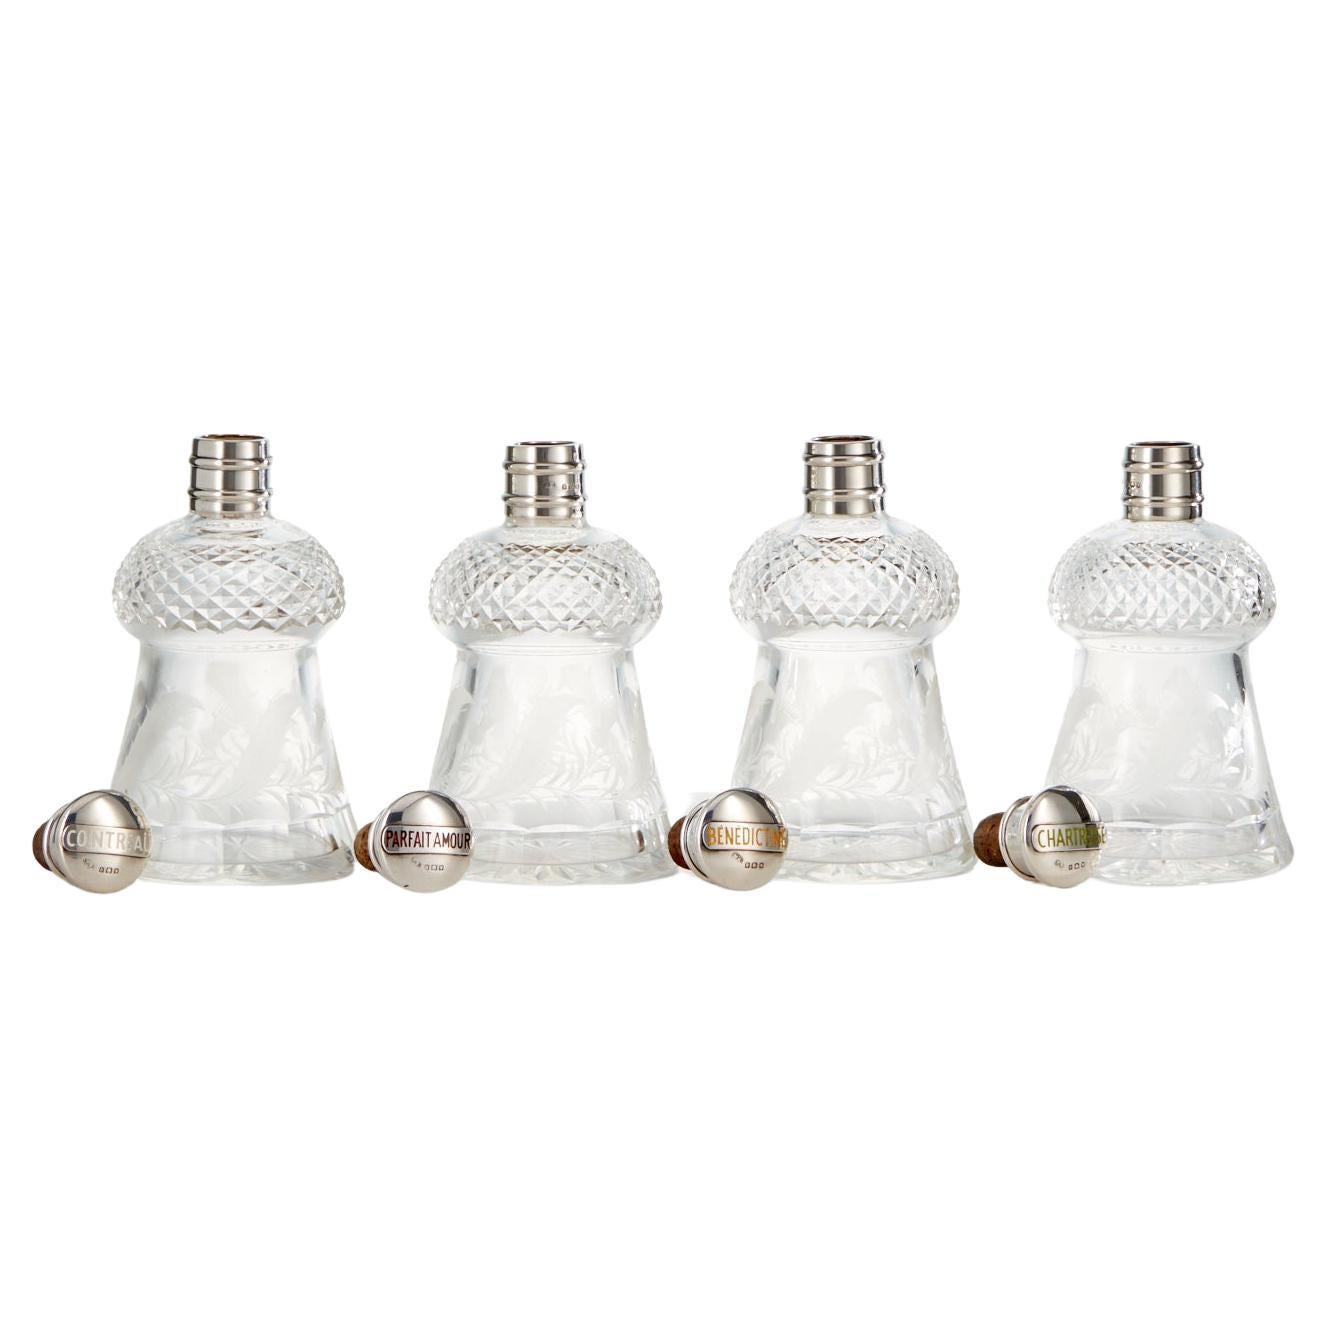 Antique Sterling Silver Decanters with Guilloche Enamel Lids by W G Groves 1933.
A set of 4 sterling silver mounted Liquor Decanters with enamel decoration. Maker Walter Gardener Groves Date 1933

Engraved Hobnail glass with thistle form and